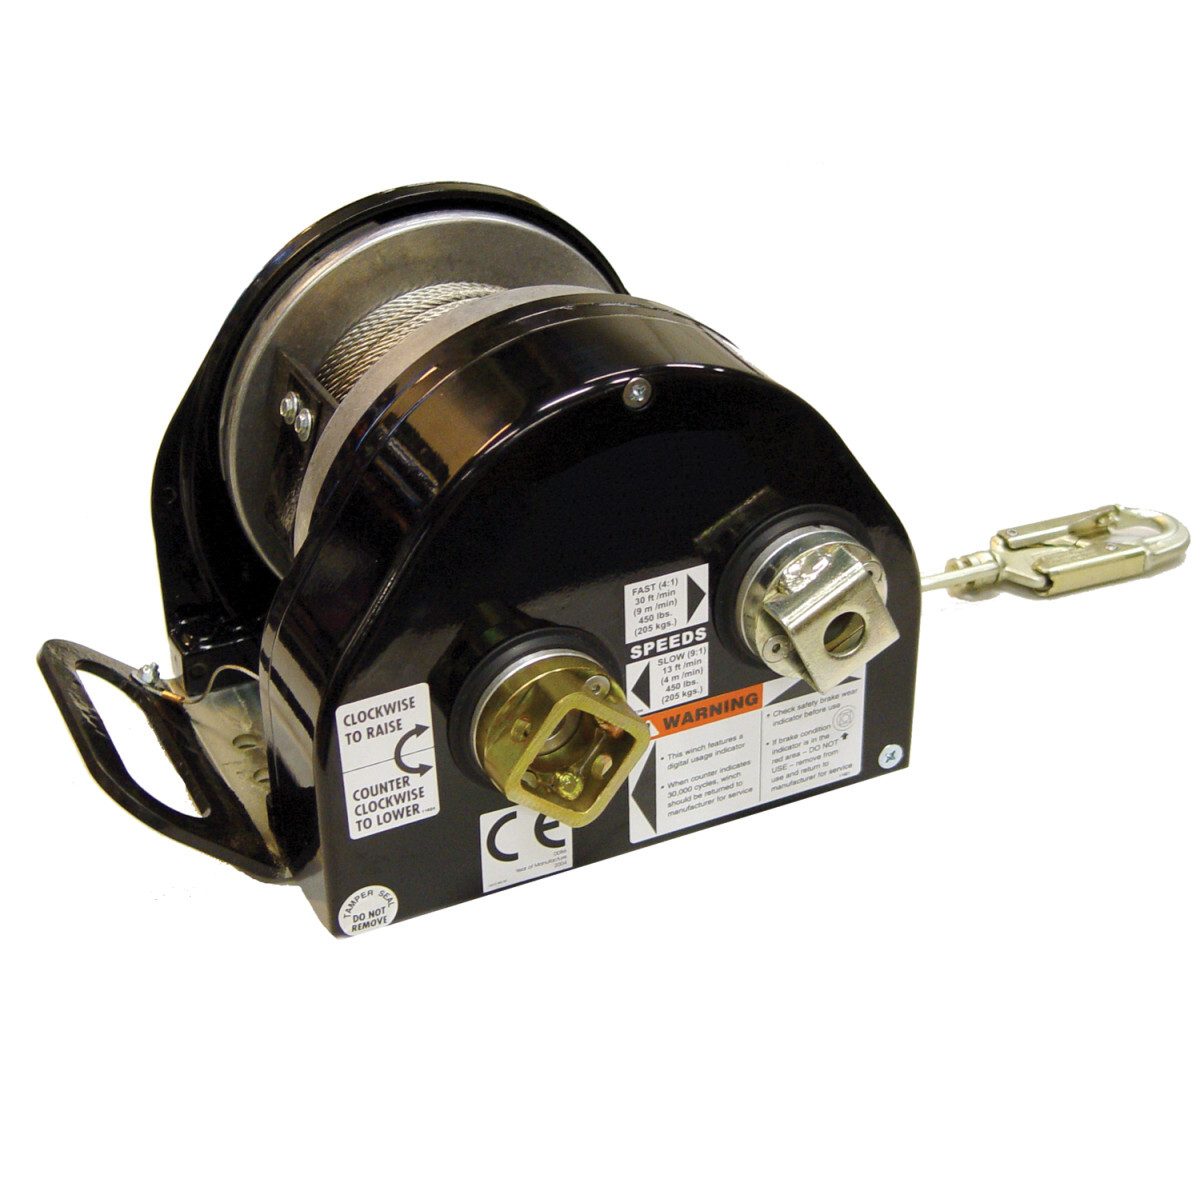 3M™ DBI-SALA® Confined Space Winch, Power Drive 8518588